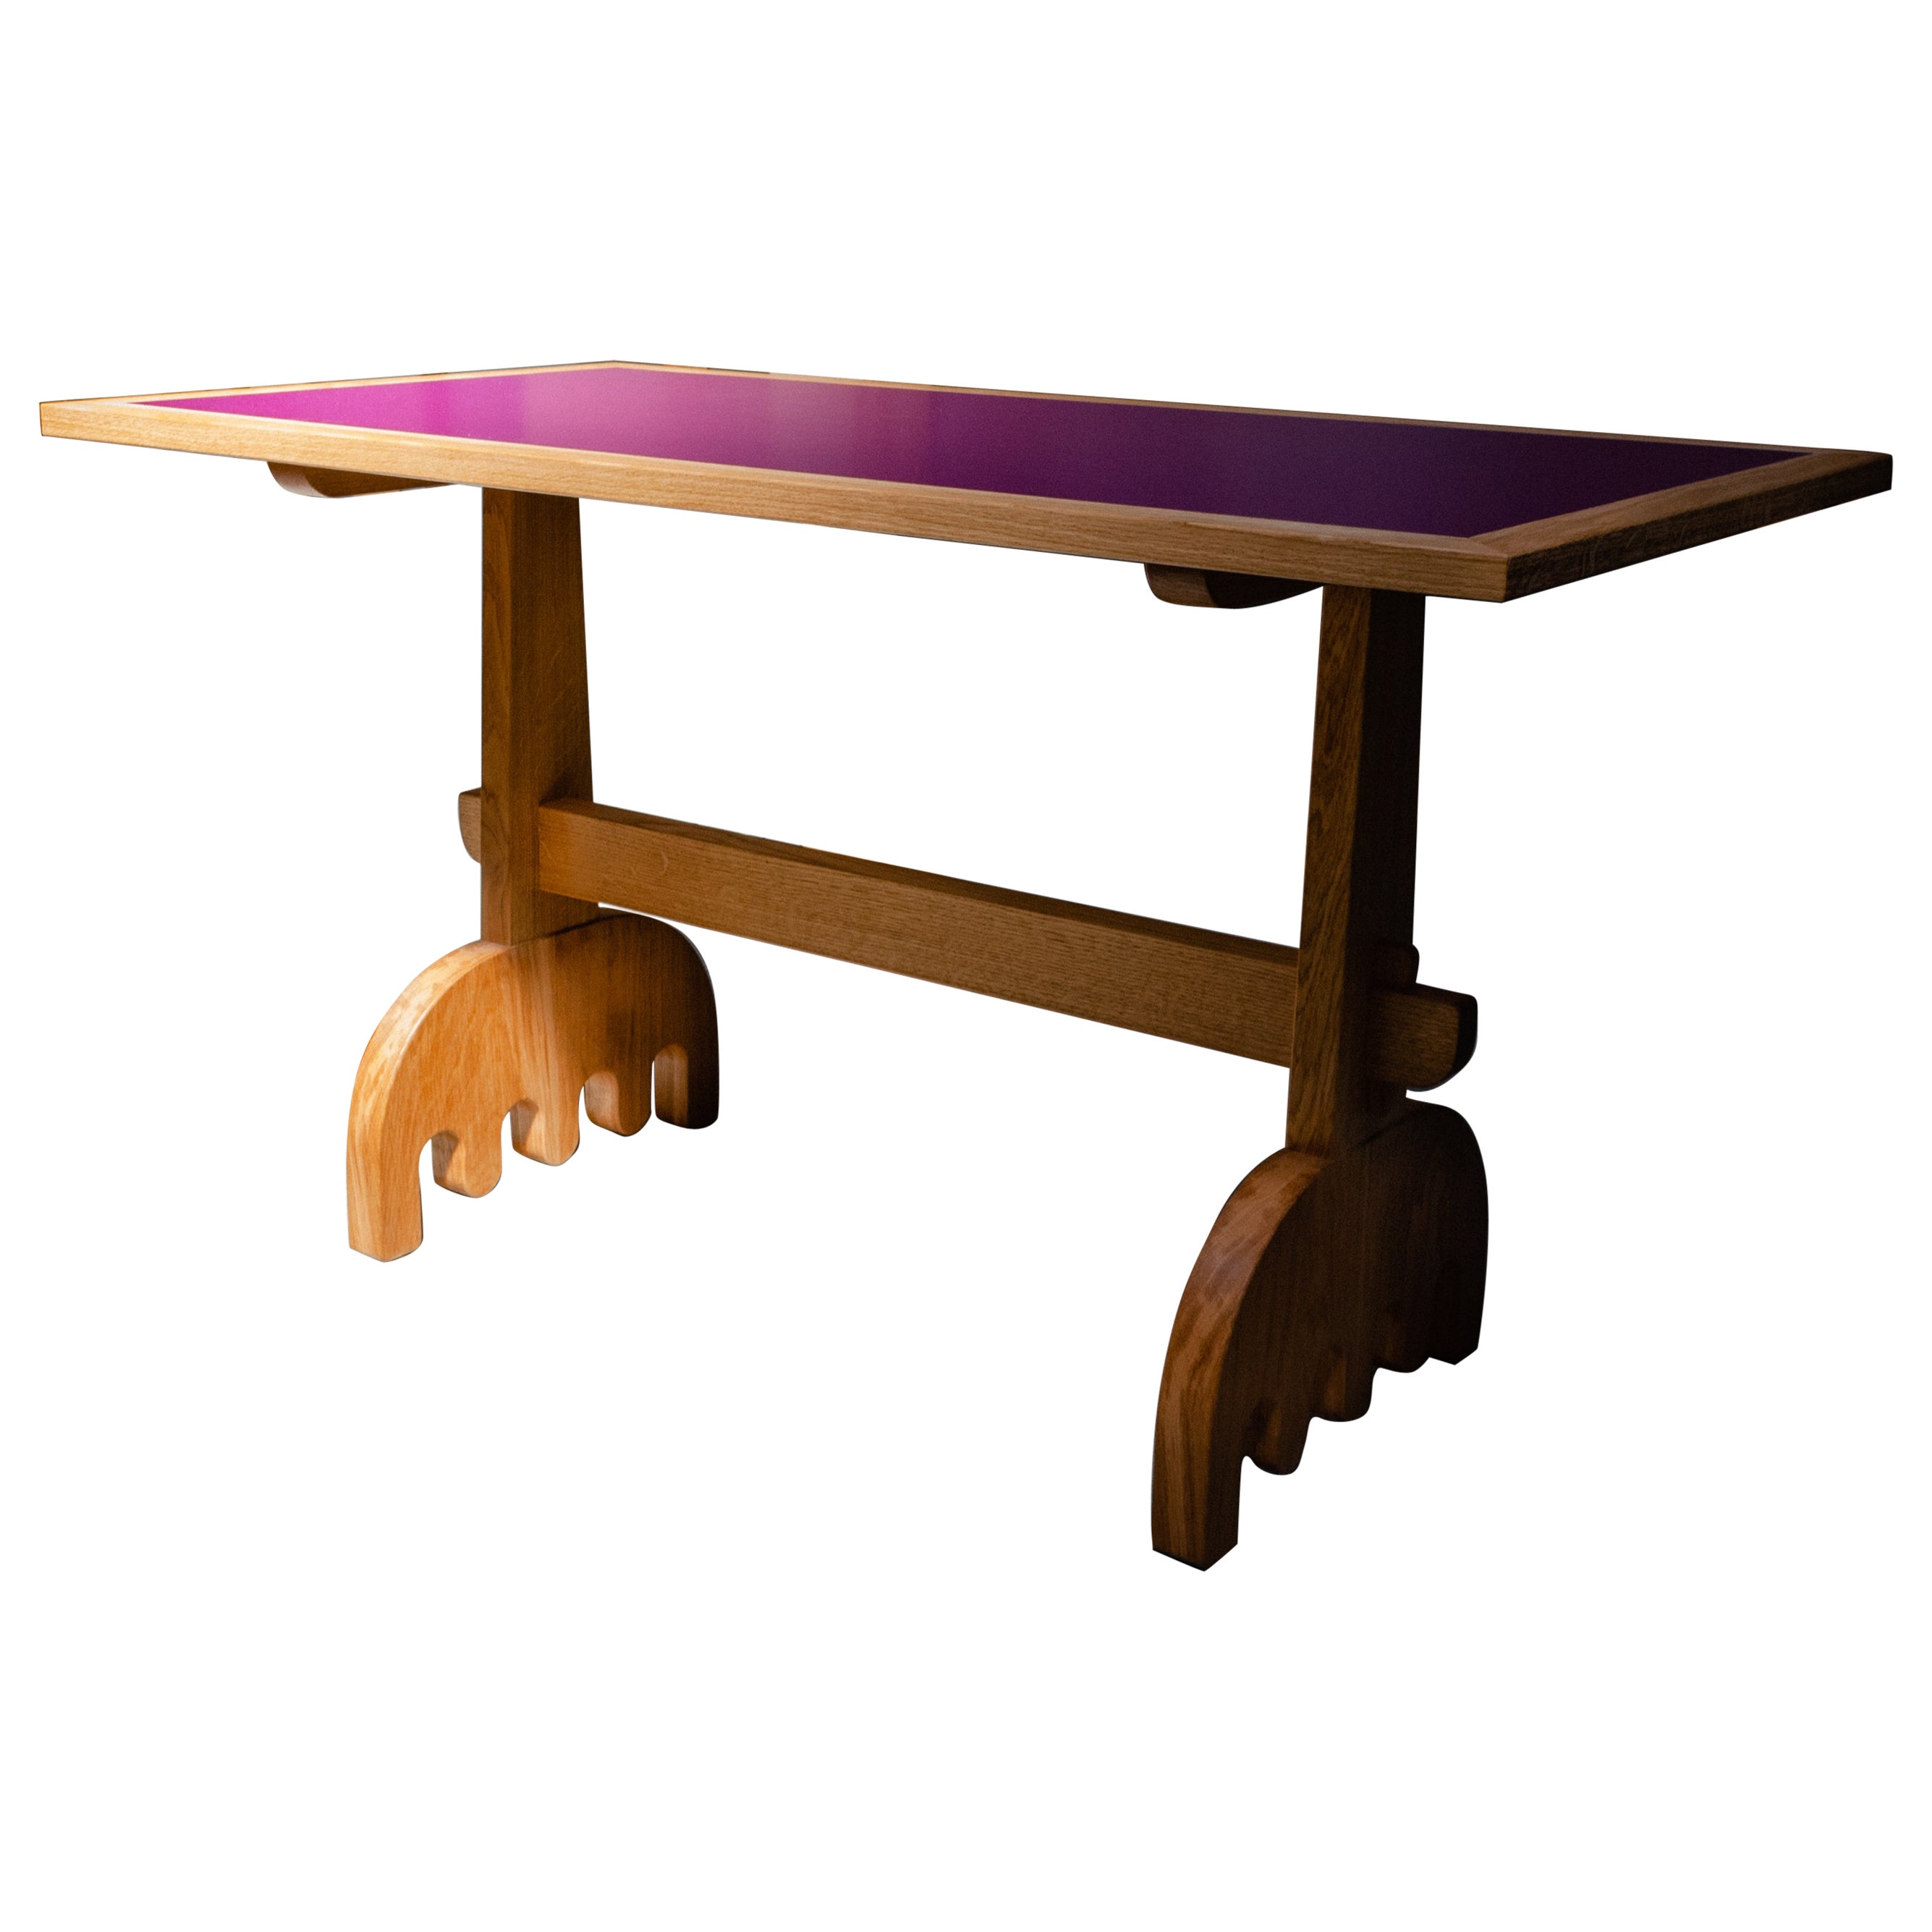 Organic Modern Table, Solid Oak, Pink Formica Top, Handmade by Loose Fit, UK For Sale